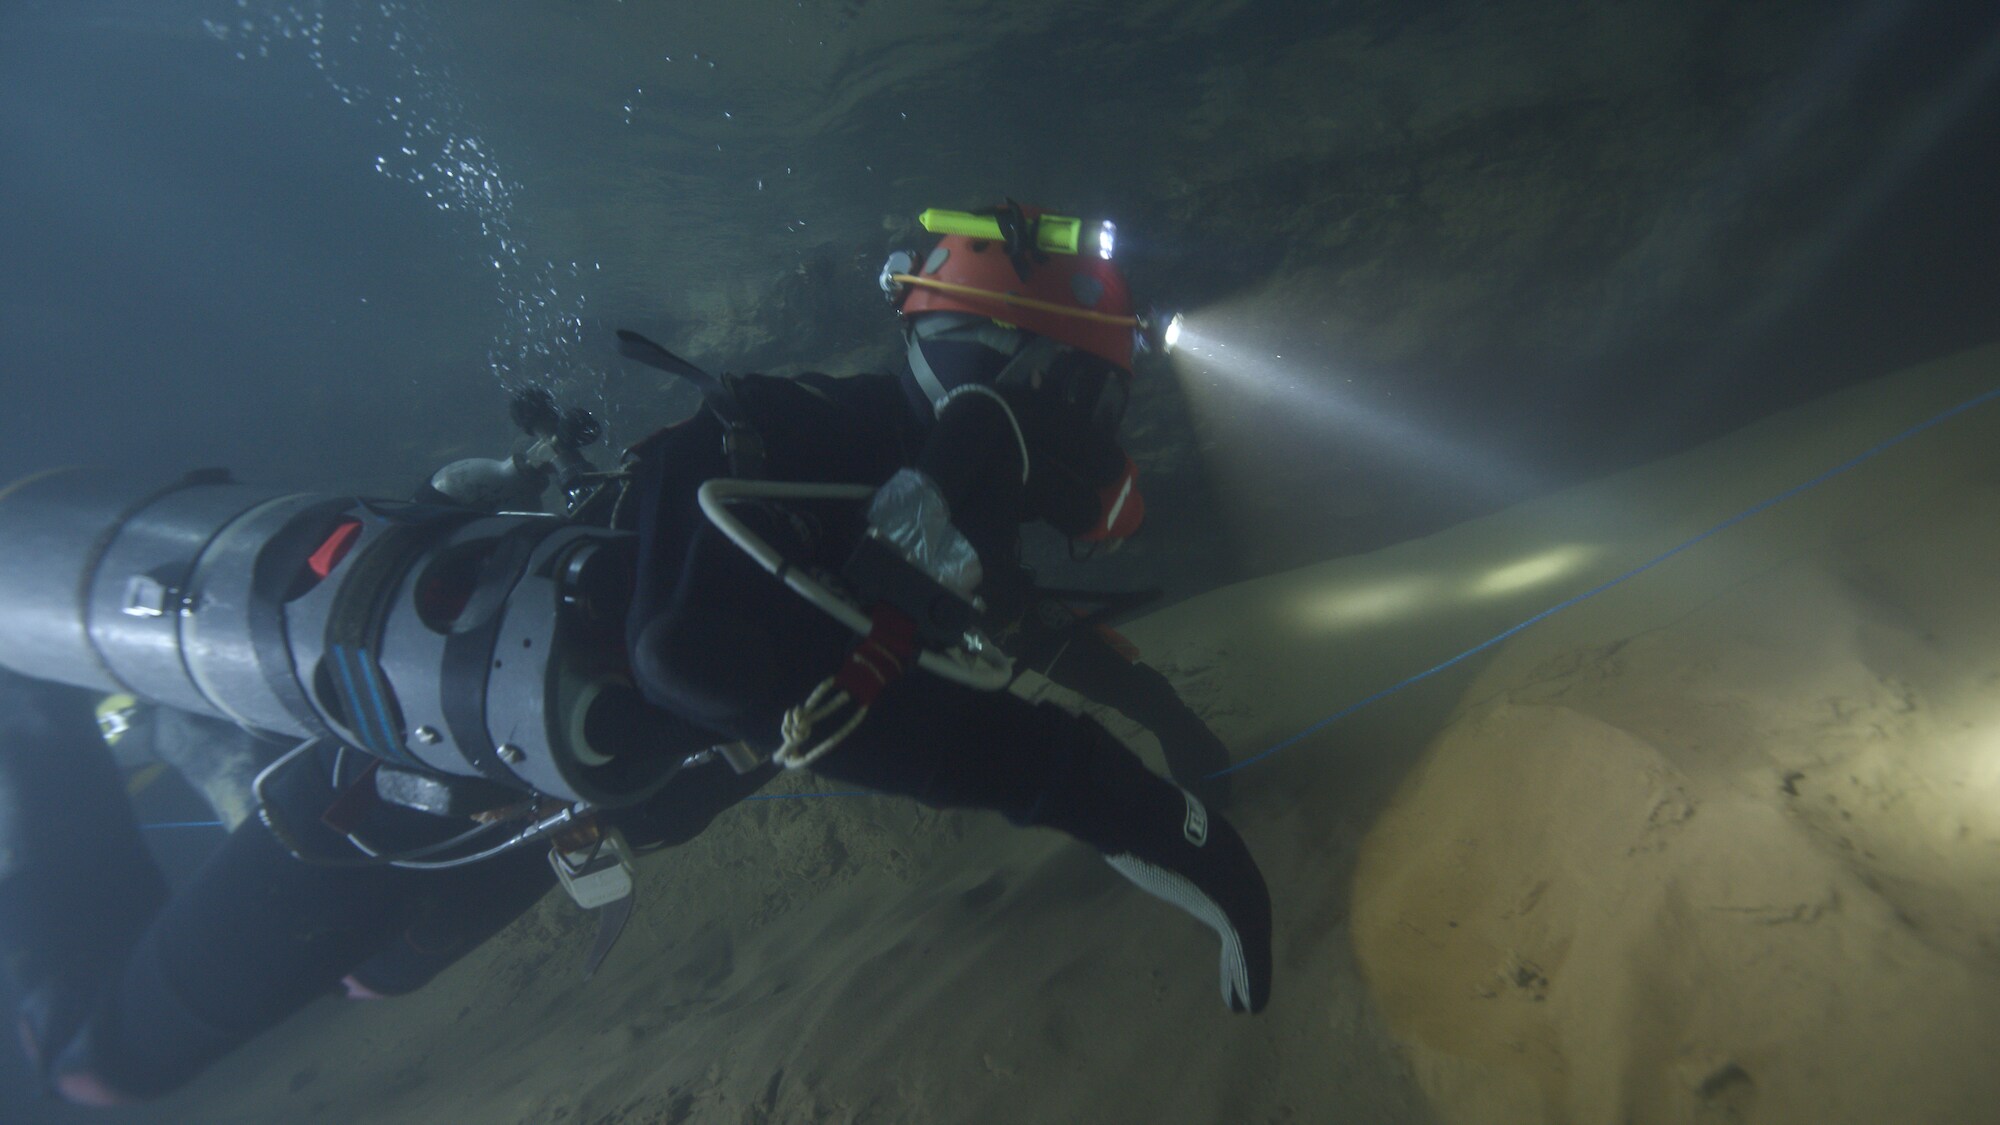 Diver in cave with headlamp.  THE RESCUE chronicles the 2018 rescue of 12 Thai boys and their soccer coach, trapped deep inside a flooded cave. E. Chai Vasarhelyi and Jimmy Chin reveal the perilous world of cave diving, bravery of the rescuers, and dedication of a community that made great sacrifices to save these young boys. (Credit: National Geographic)